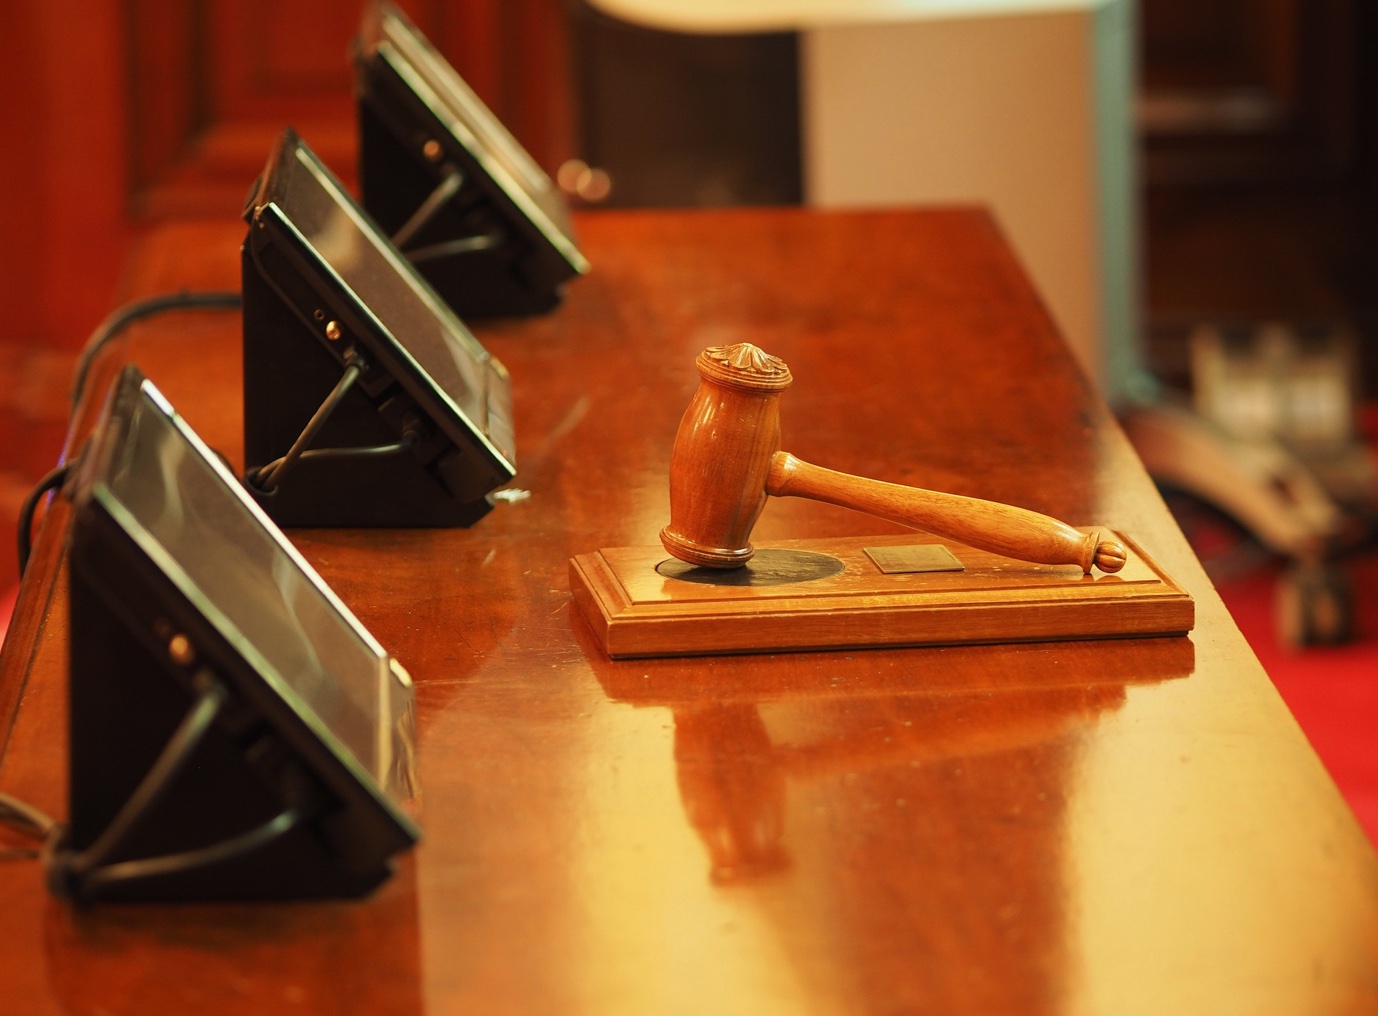 Gavel and tablets on desk in courtroom; image by Daniel B Photos, via Pixabay.com.